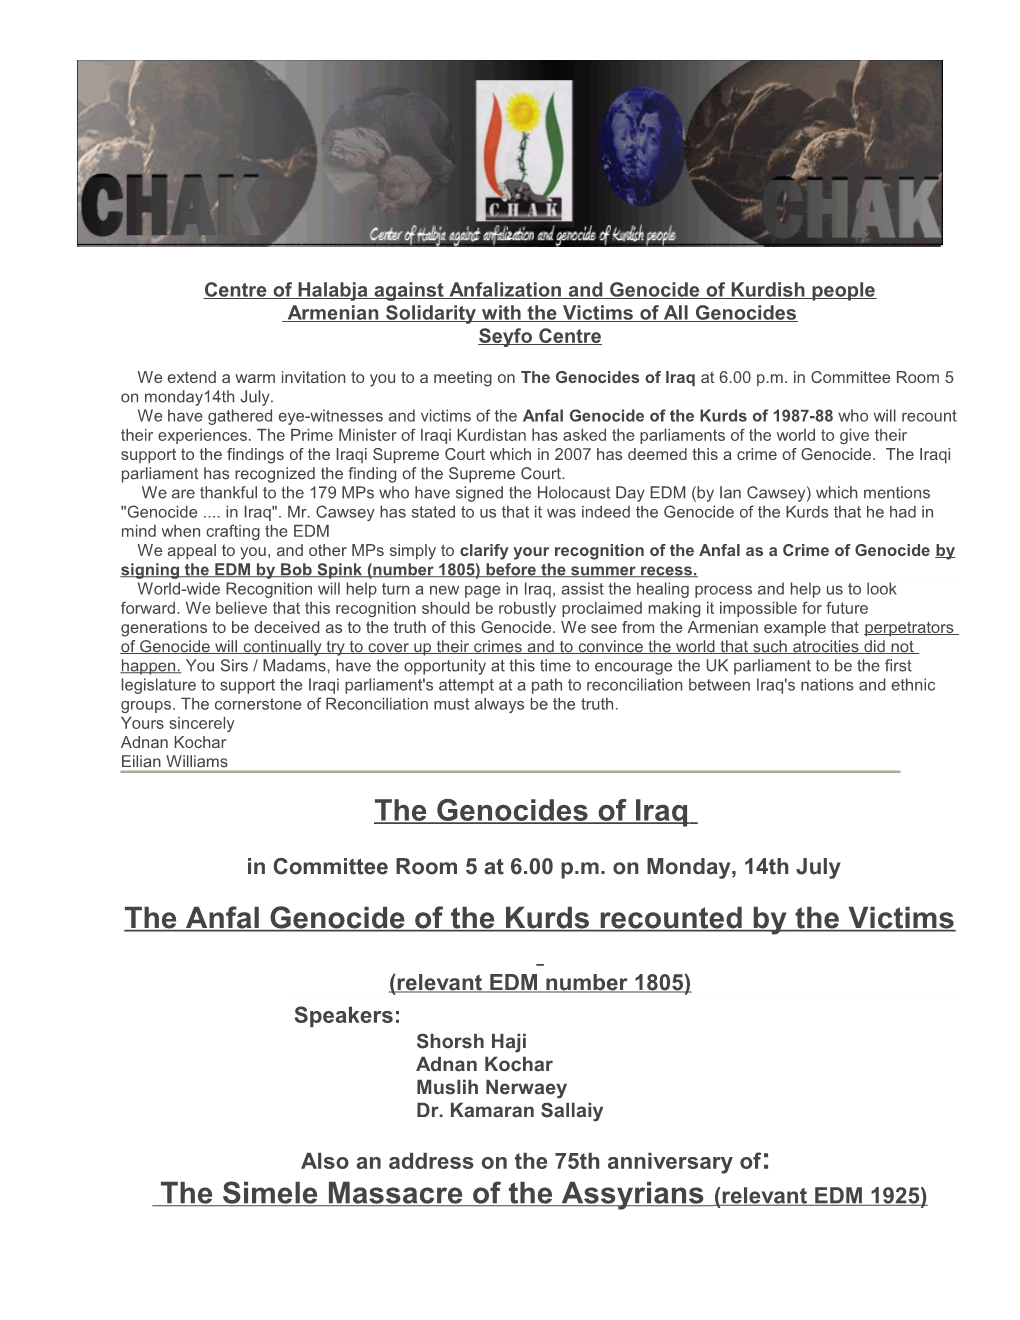 Centreof Halabja Against Anfalization and Genocide of Kurdish People